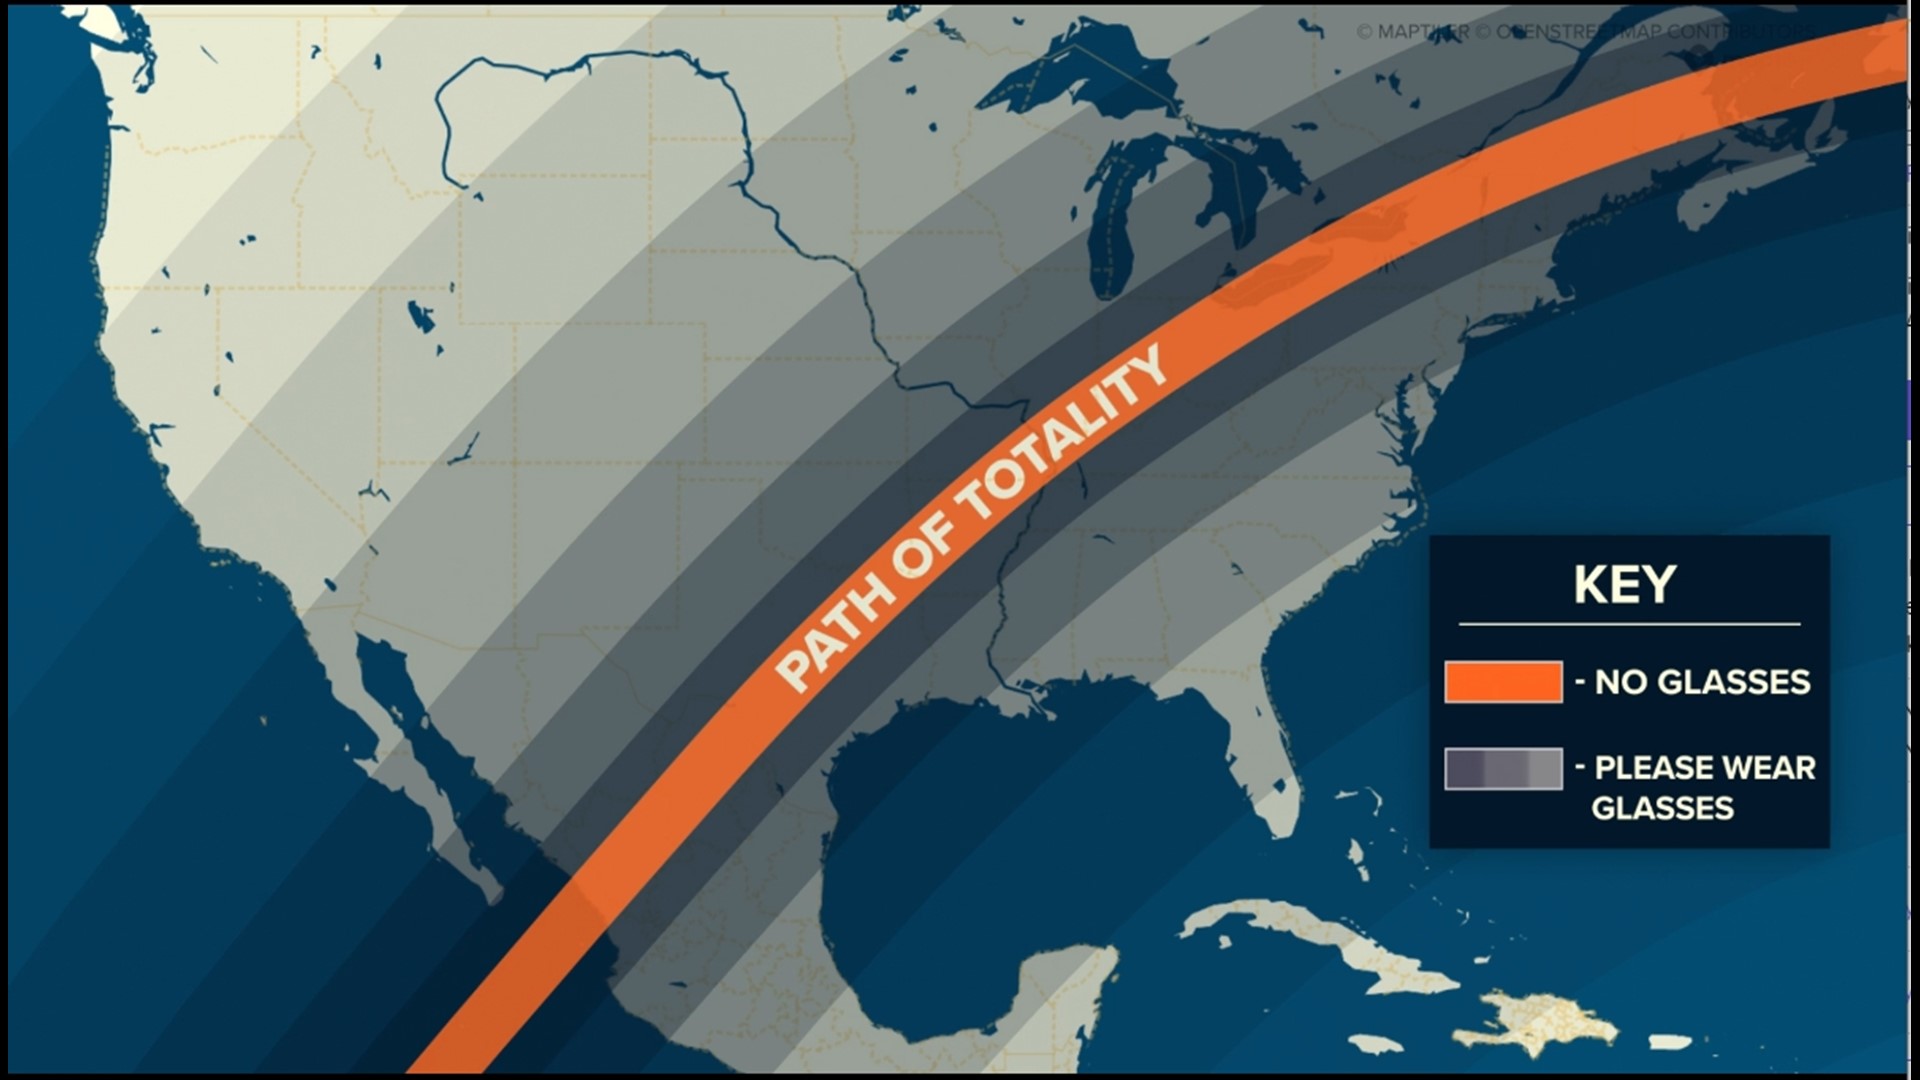 Here's the full path of totality for the upcoming total solar eclipse on April 8, 2024.